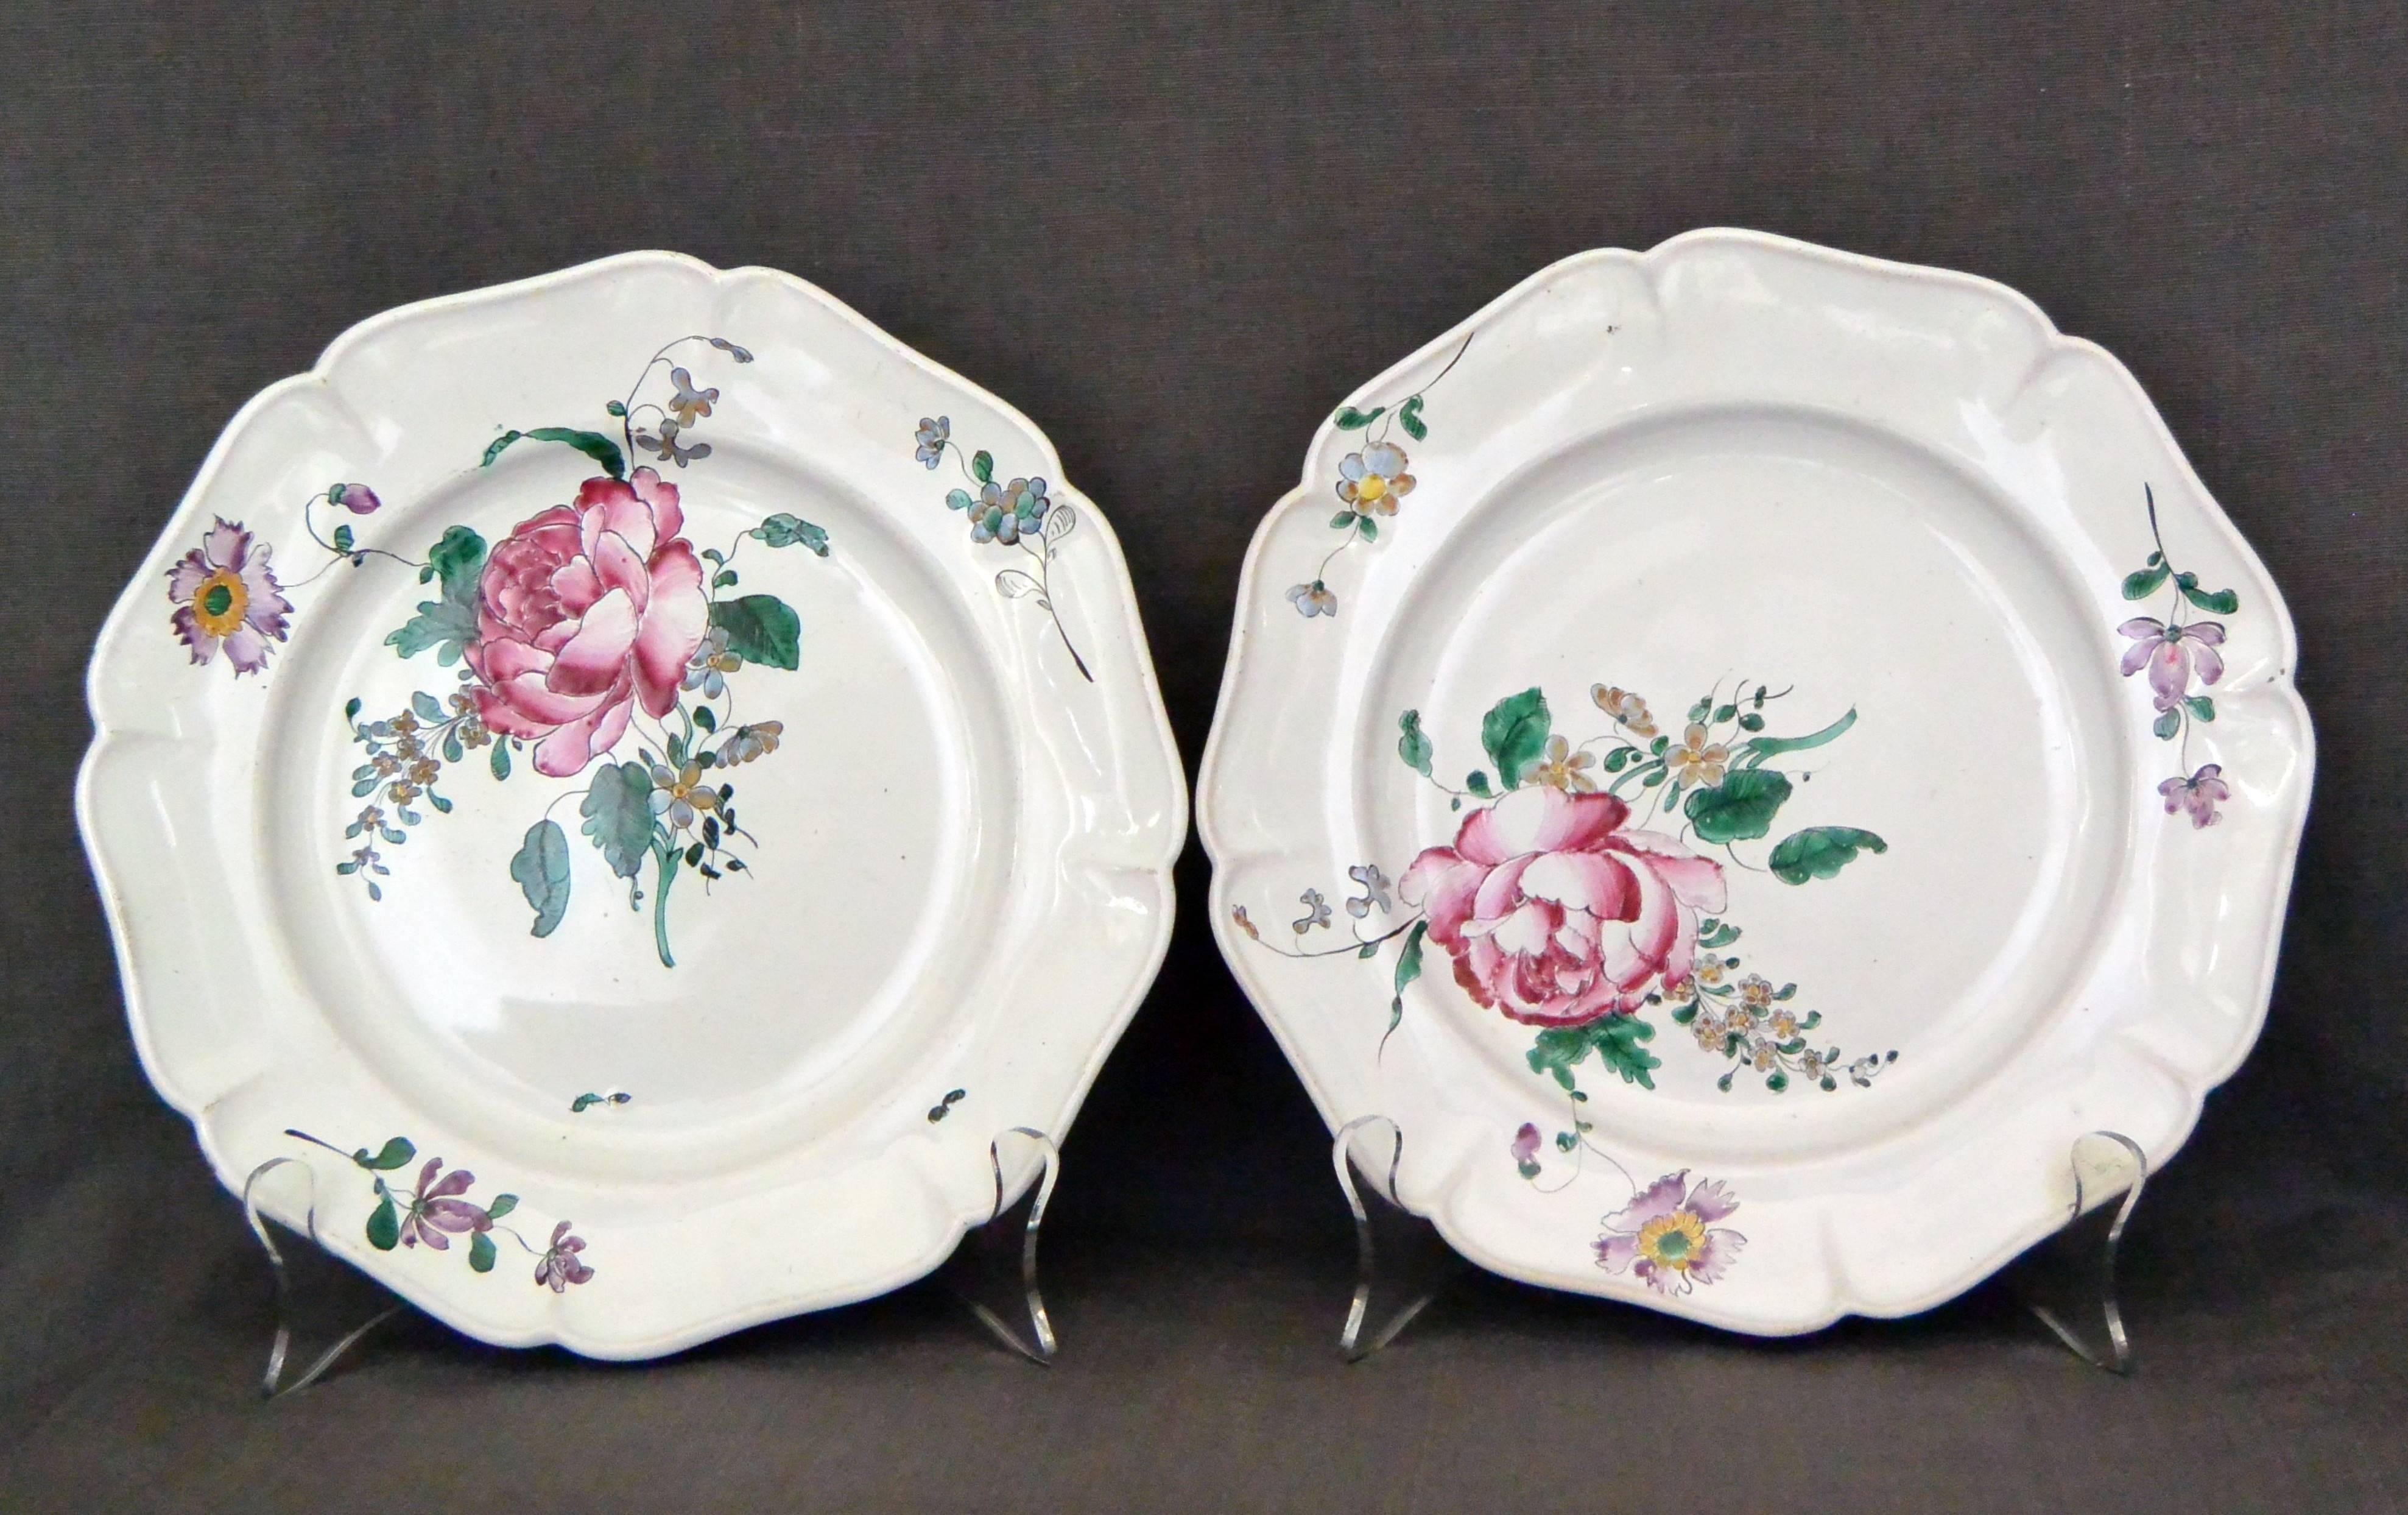 Pair of Strasbourg faience floral plates. Antique faience plates with large floral bouquets and lobed rims with further floral sprays and insects; with blue underglaze markings for Hannong Factory, France, circa 1750. 
Dimension: 9" diameter x